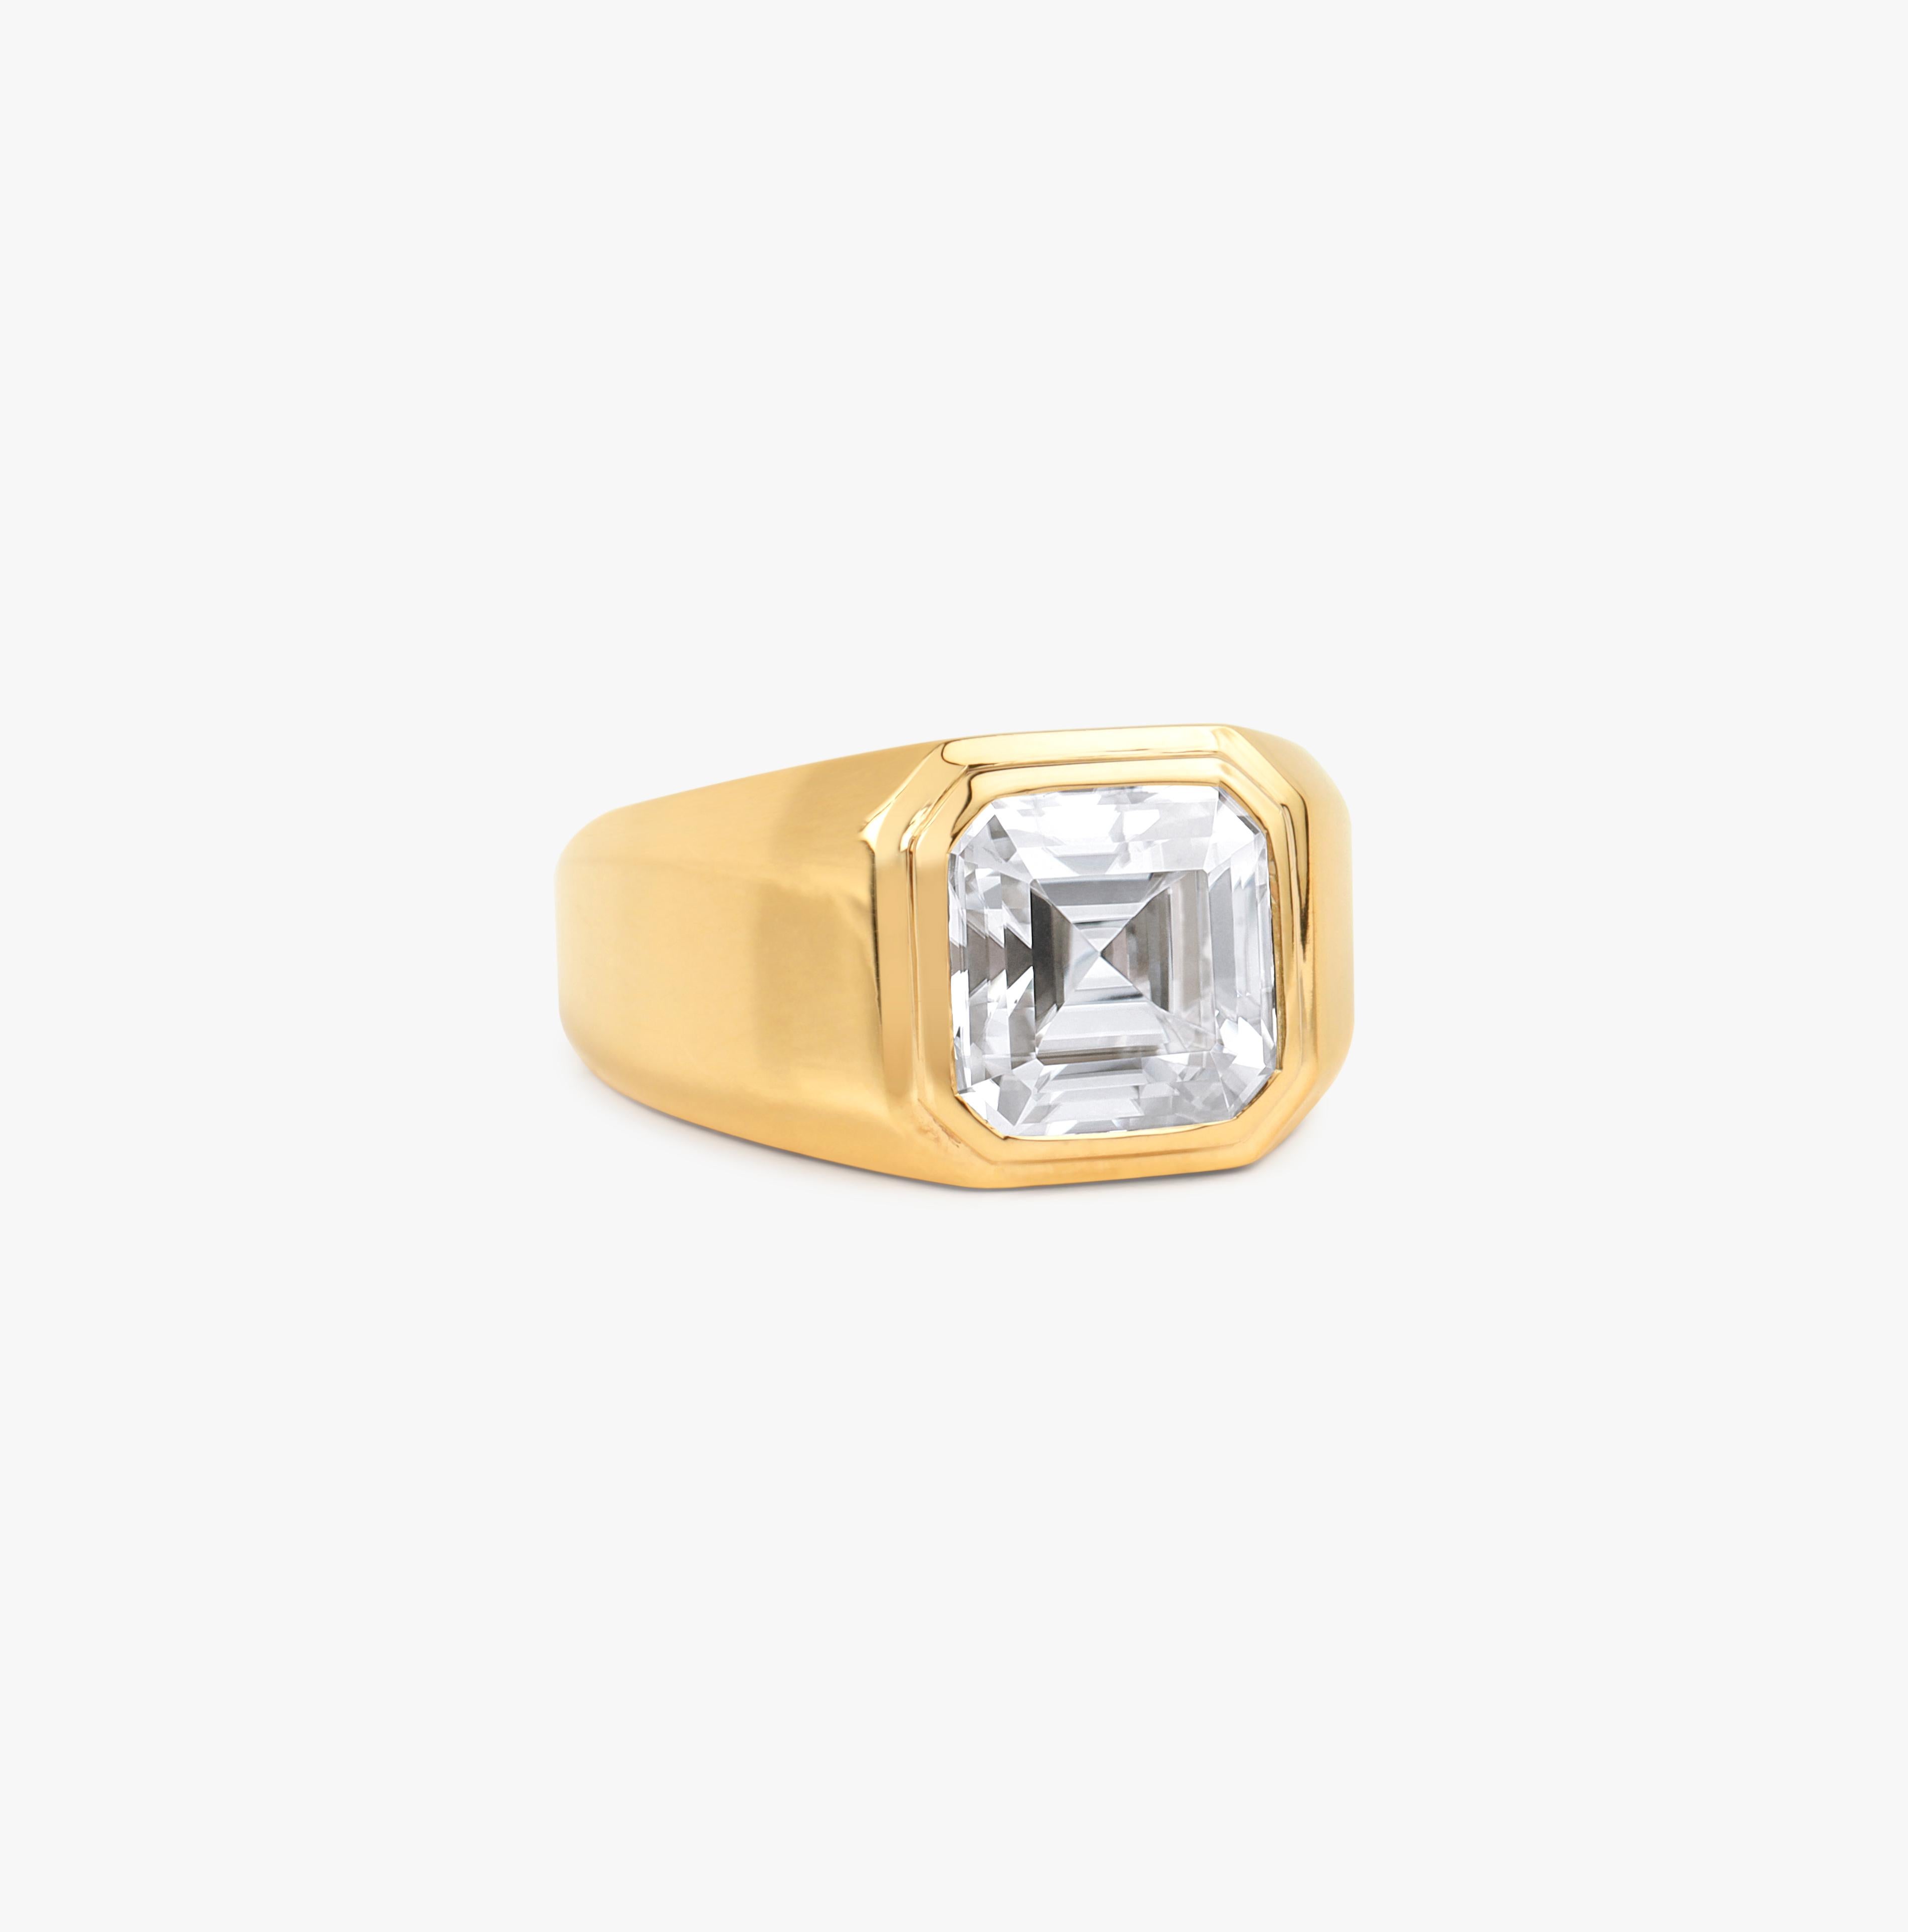 GIA Report Certified 4 Carat Asscher Cut Diamond in 18k Yellow Gold Signet Ring  In New Condition For Sale In Jaipur, RJ